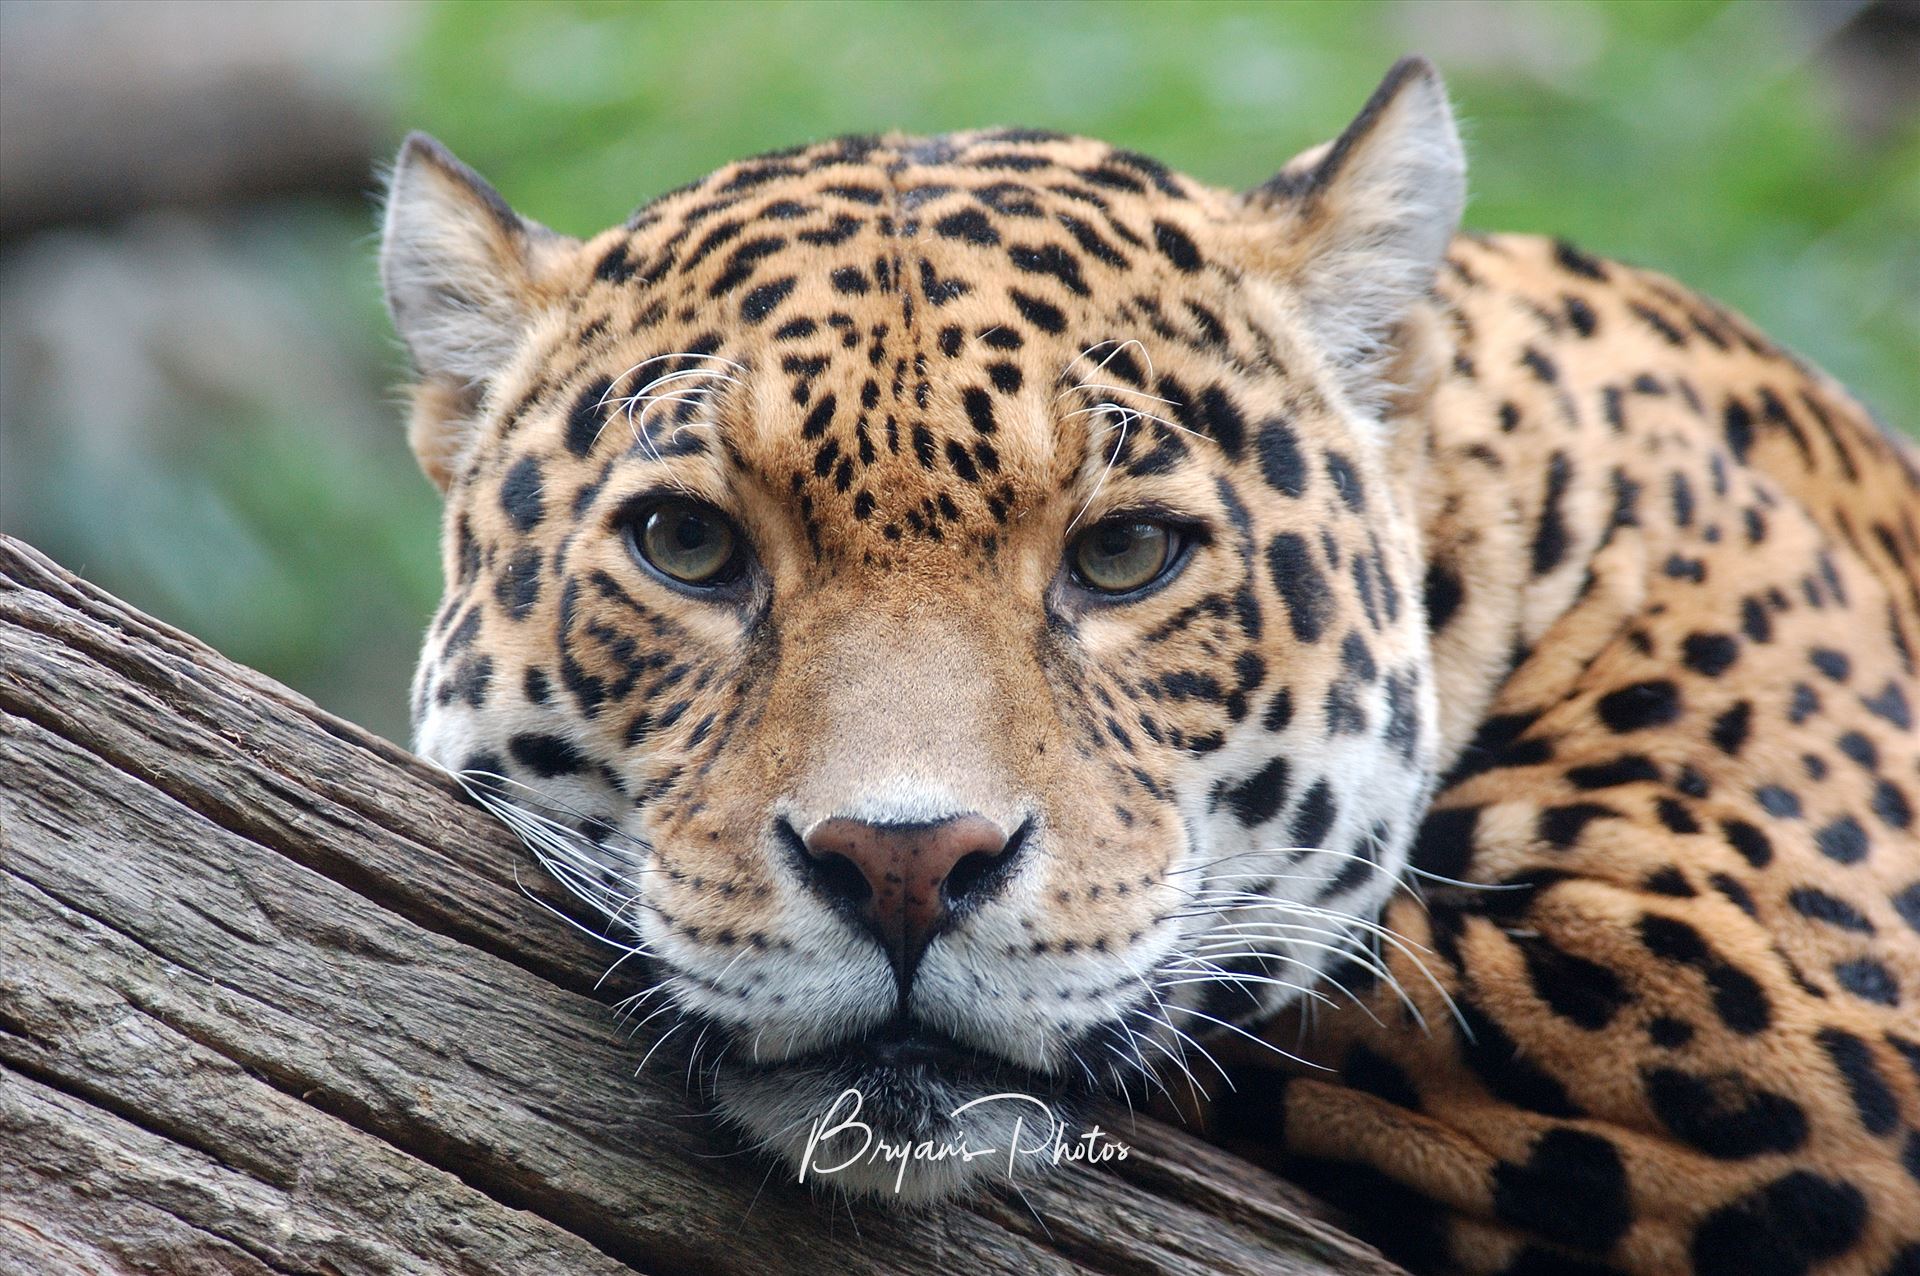 Jaguar stare Photograph of a Jaguar staring straight at me. by Bryans Photos